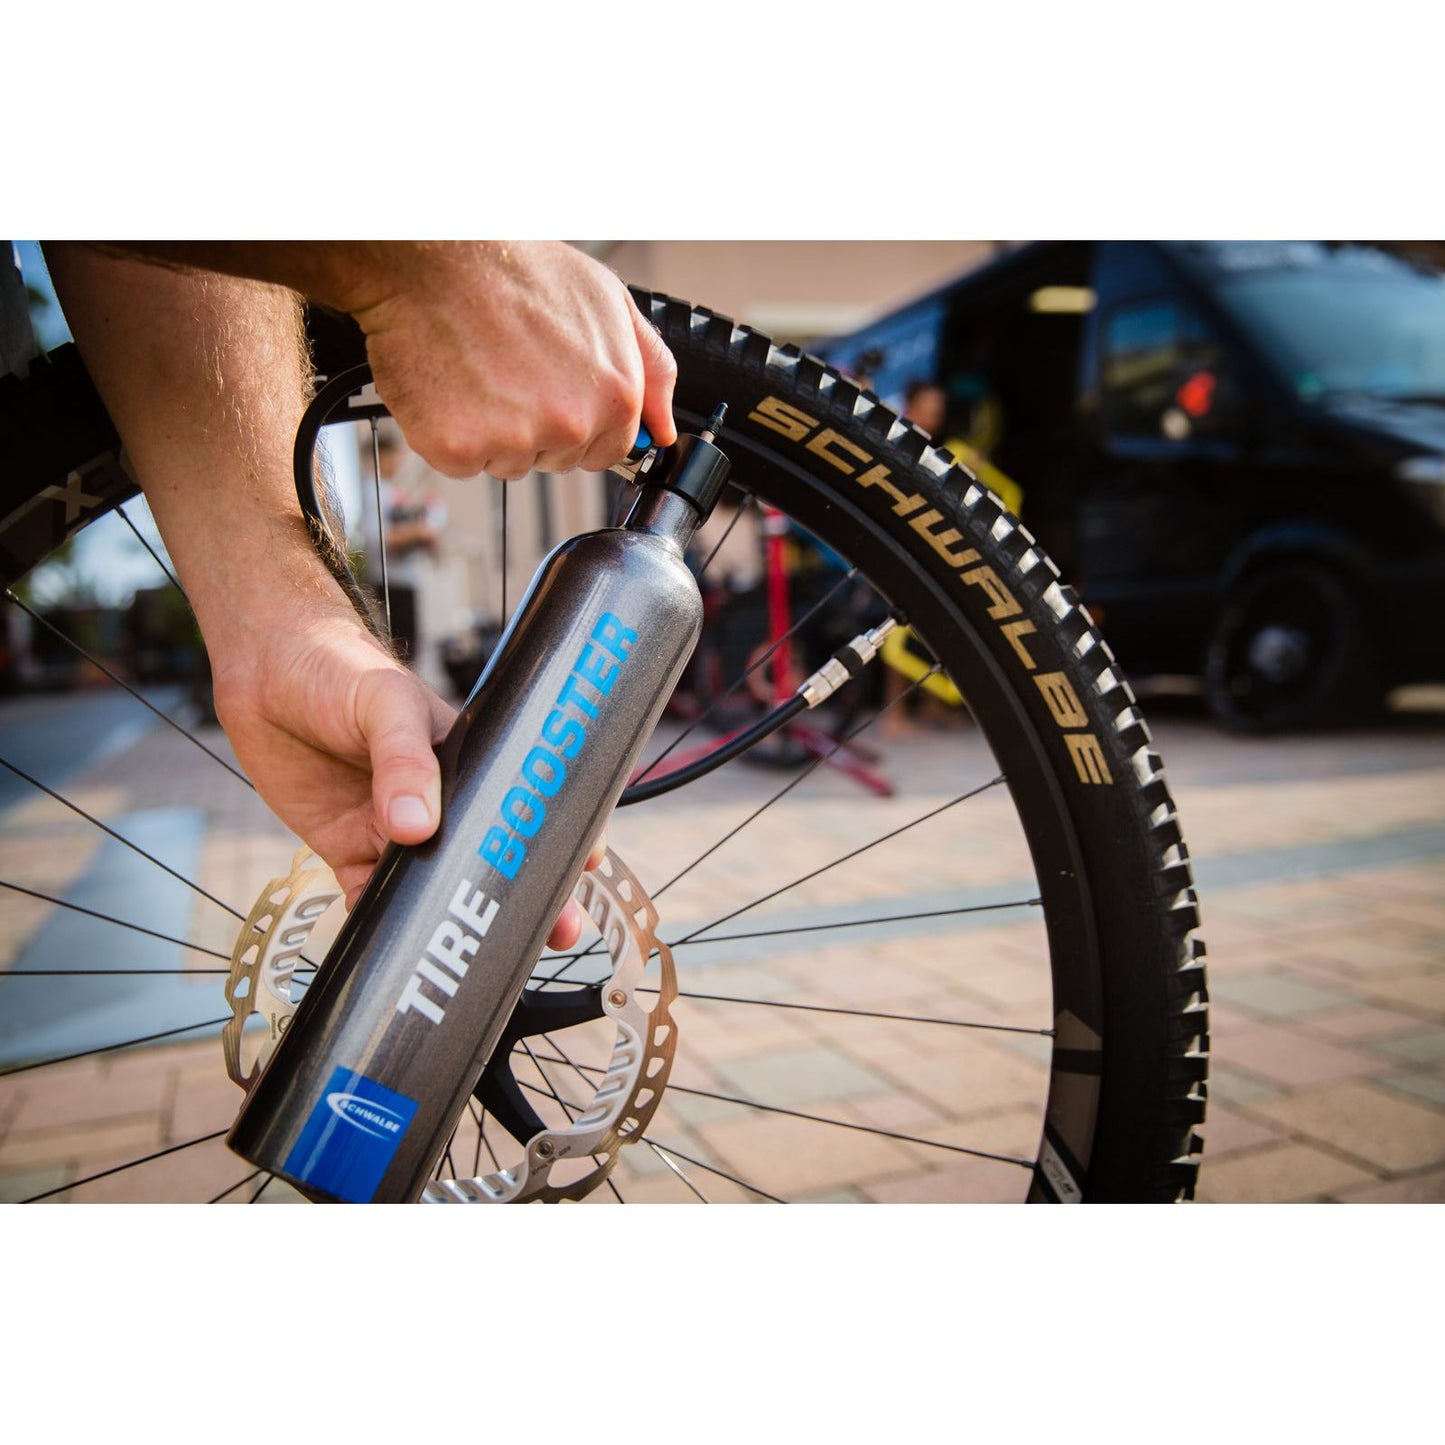 Schwalbe tire booster luchtpomp tubeless incl montage riem 6080.01